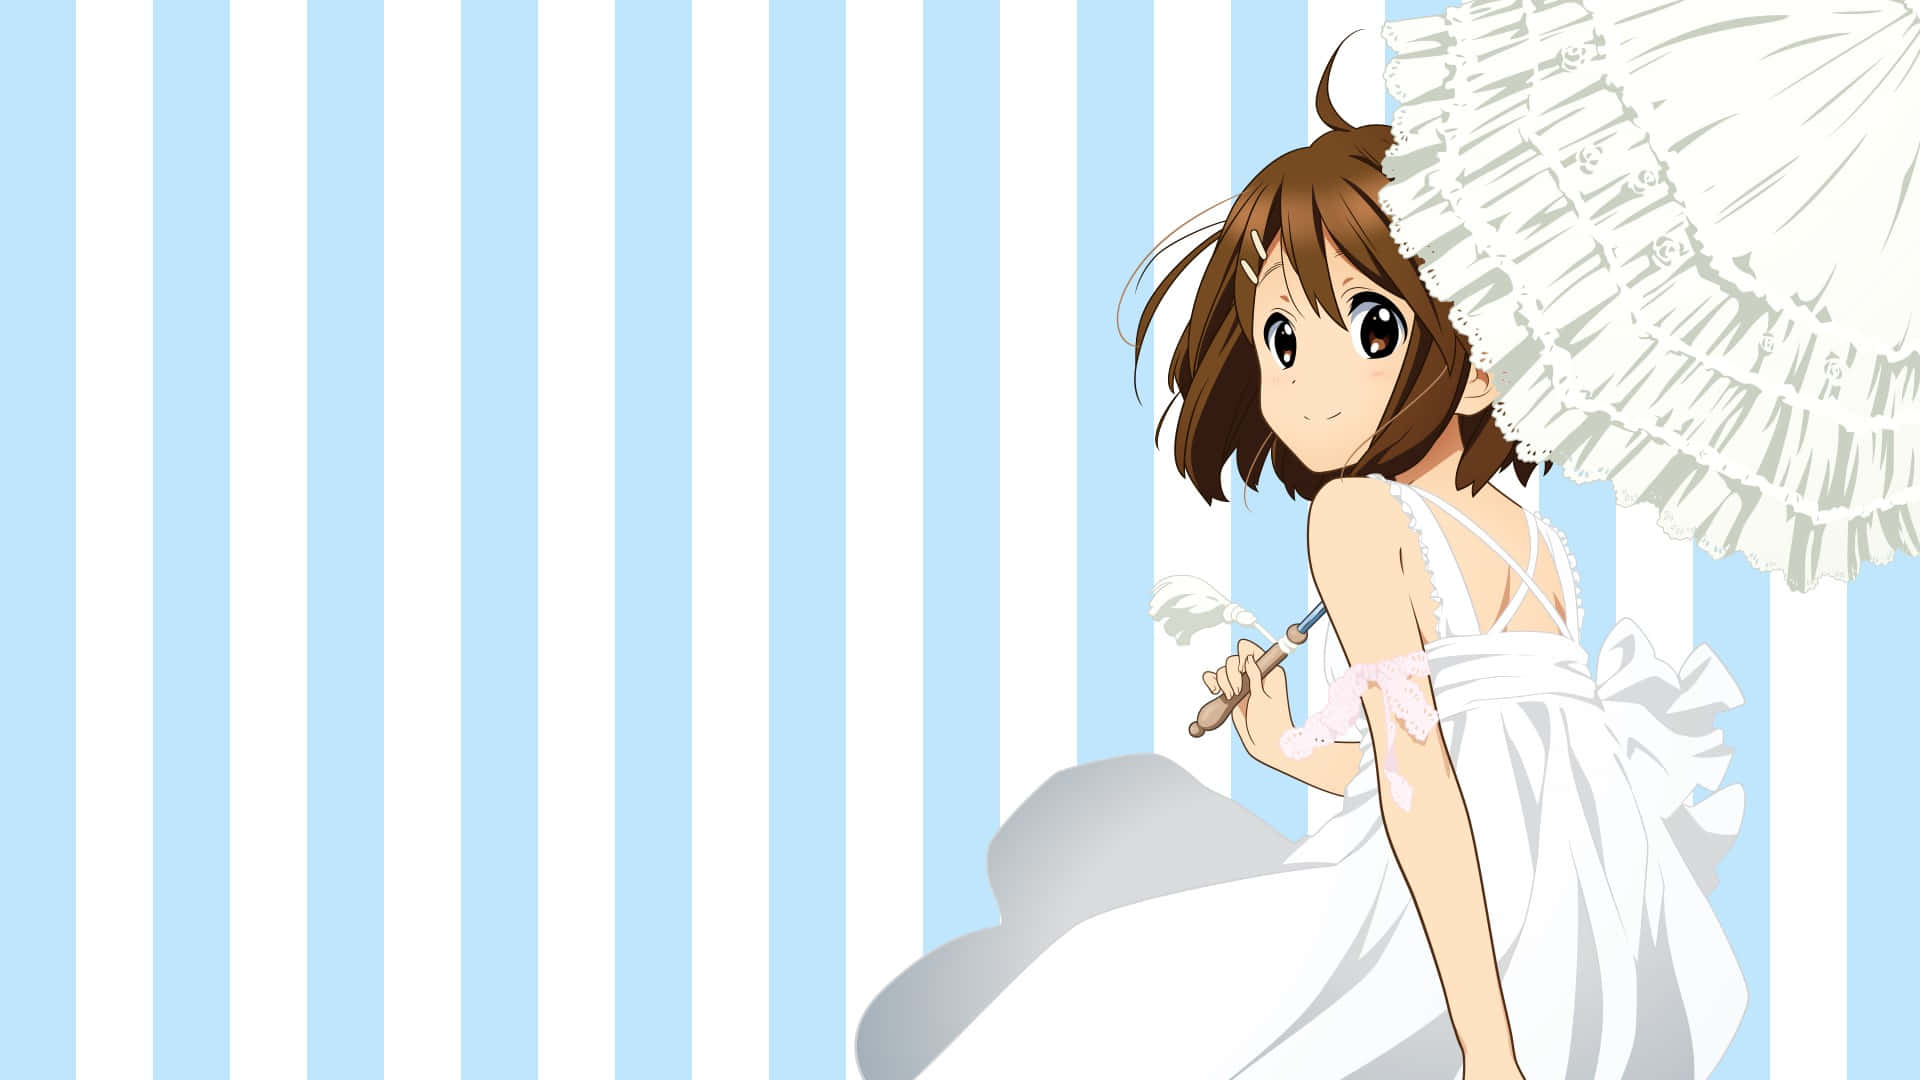 Yui Hirasawa striking a pose with her guitar on stage Wallpaper